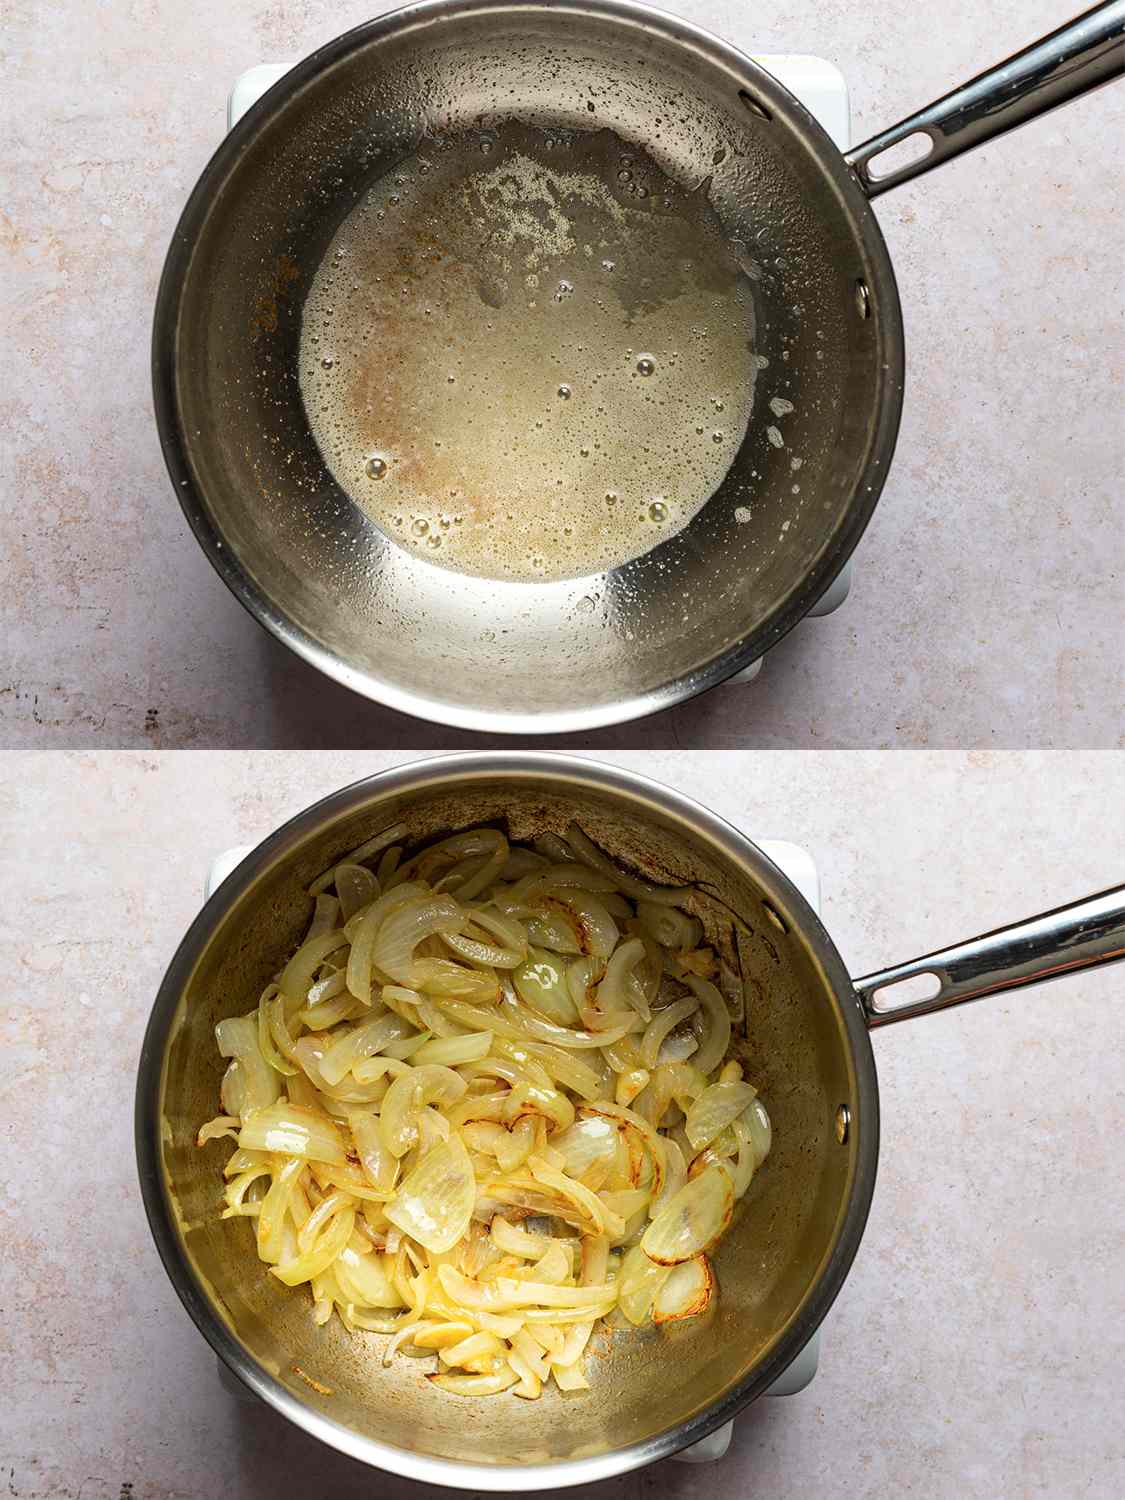 A two-image collage. The top image shows butter starting to brown inside of a stainless steel saucepan. The bottom image shows onion and garlic cooked until soft and lightly golden inside large saucepan